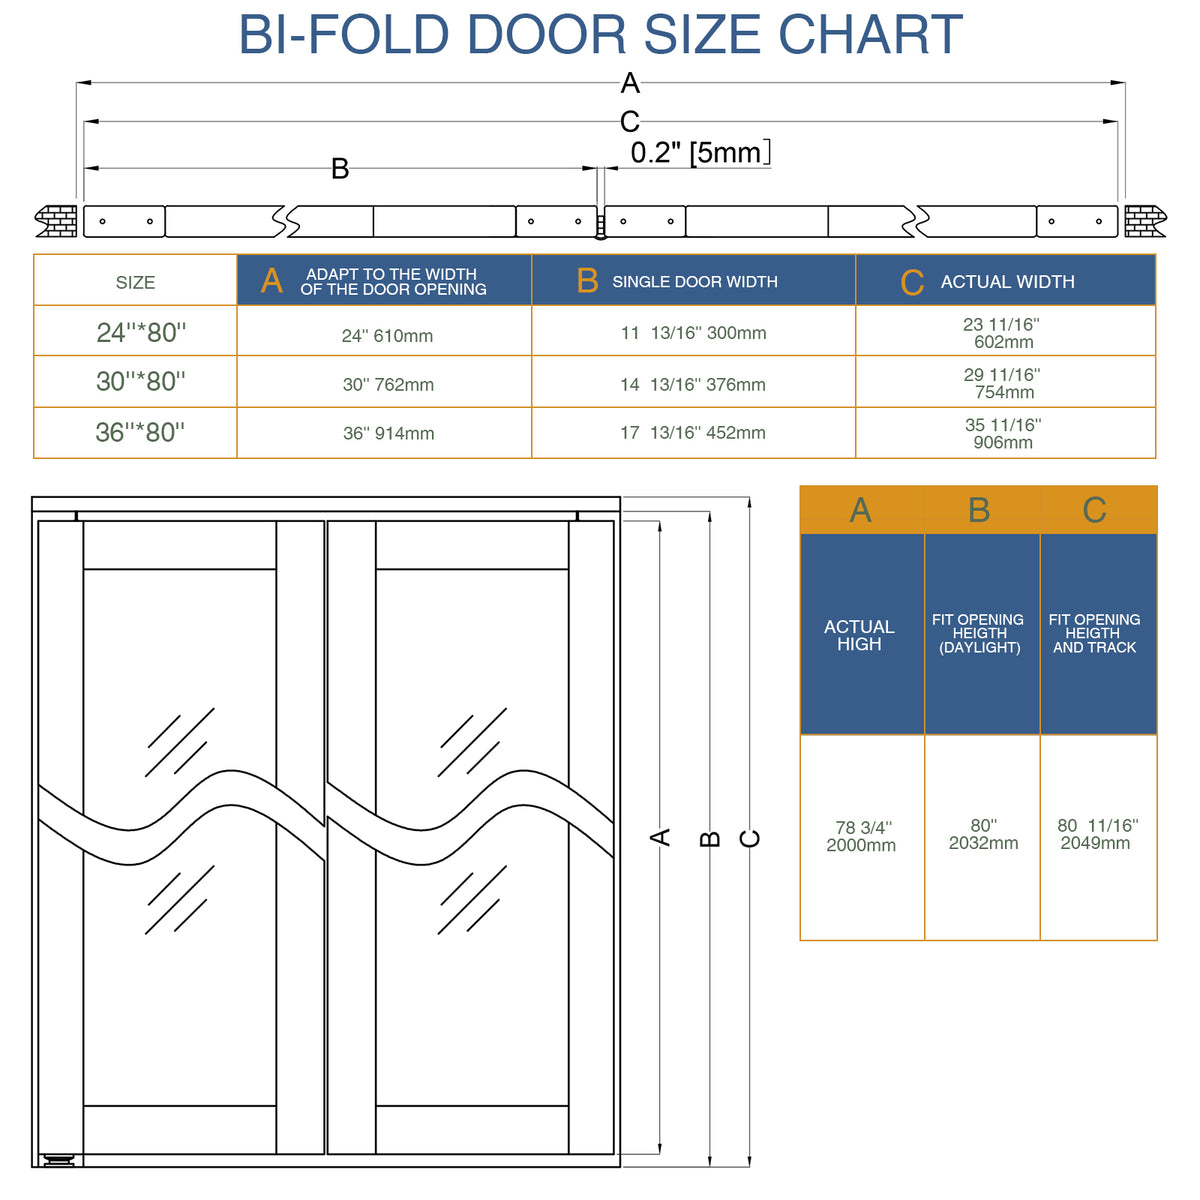 TENONER 24 in x 80 in Three Frosted Glass Panel Bi-Fold Interior Door for Closet, with MDF & Water-Proof PVC Covering